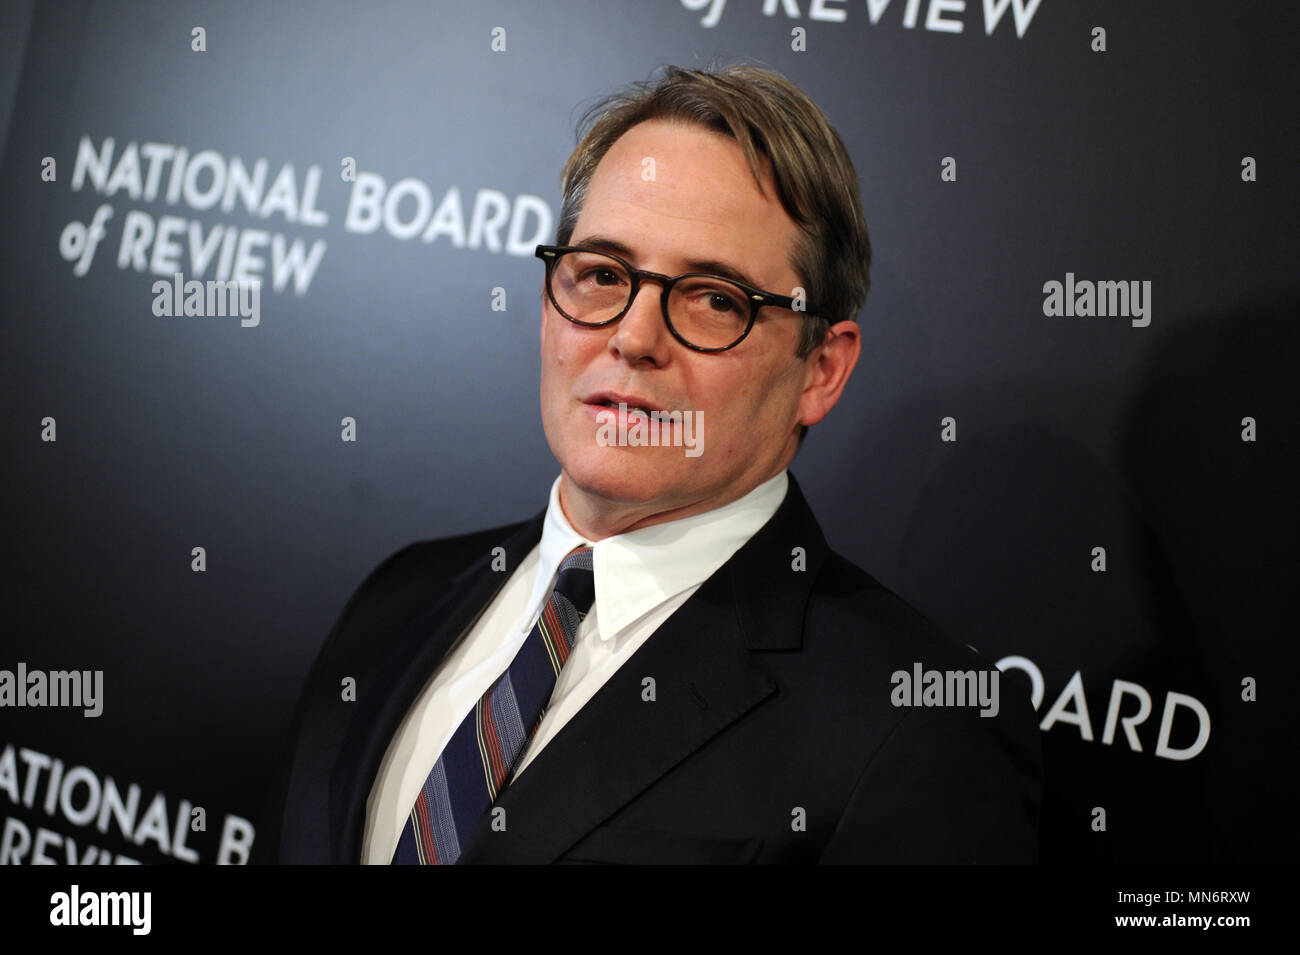 NEW YORK, NY - gennaio 04: attore Matthew Broderick assiste il 2016 National Board of Review Gala a Cipriani 42nd Street il 4 gennaio 2017 in New York City People: Matthew Broderick Foto Stock